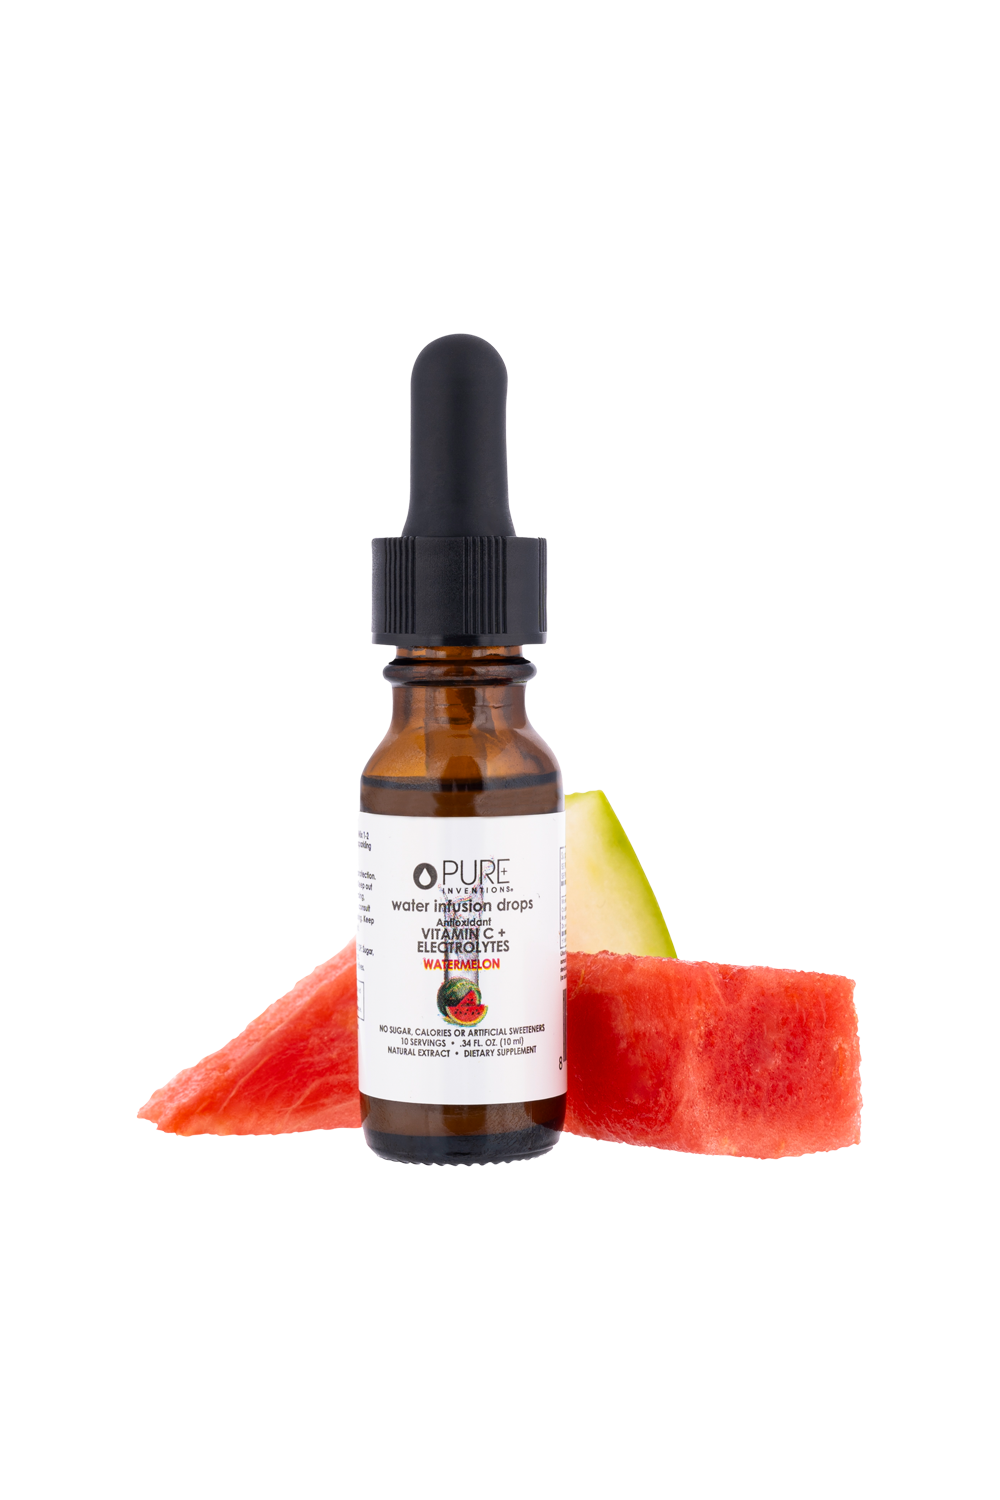 Electrolytes + Vitamin C Watermelon Deluxe Travel Size - 12 servings